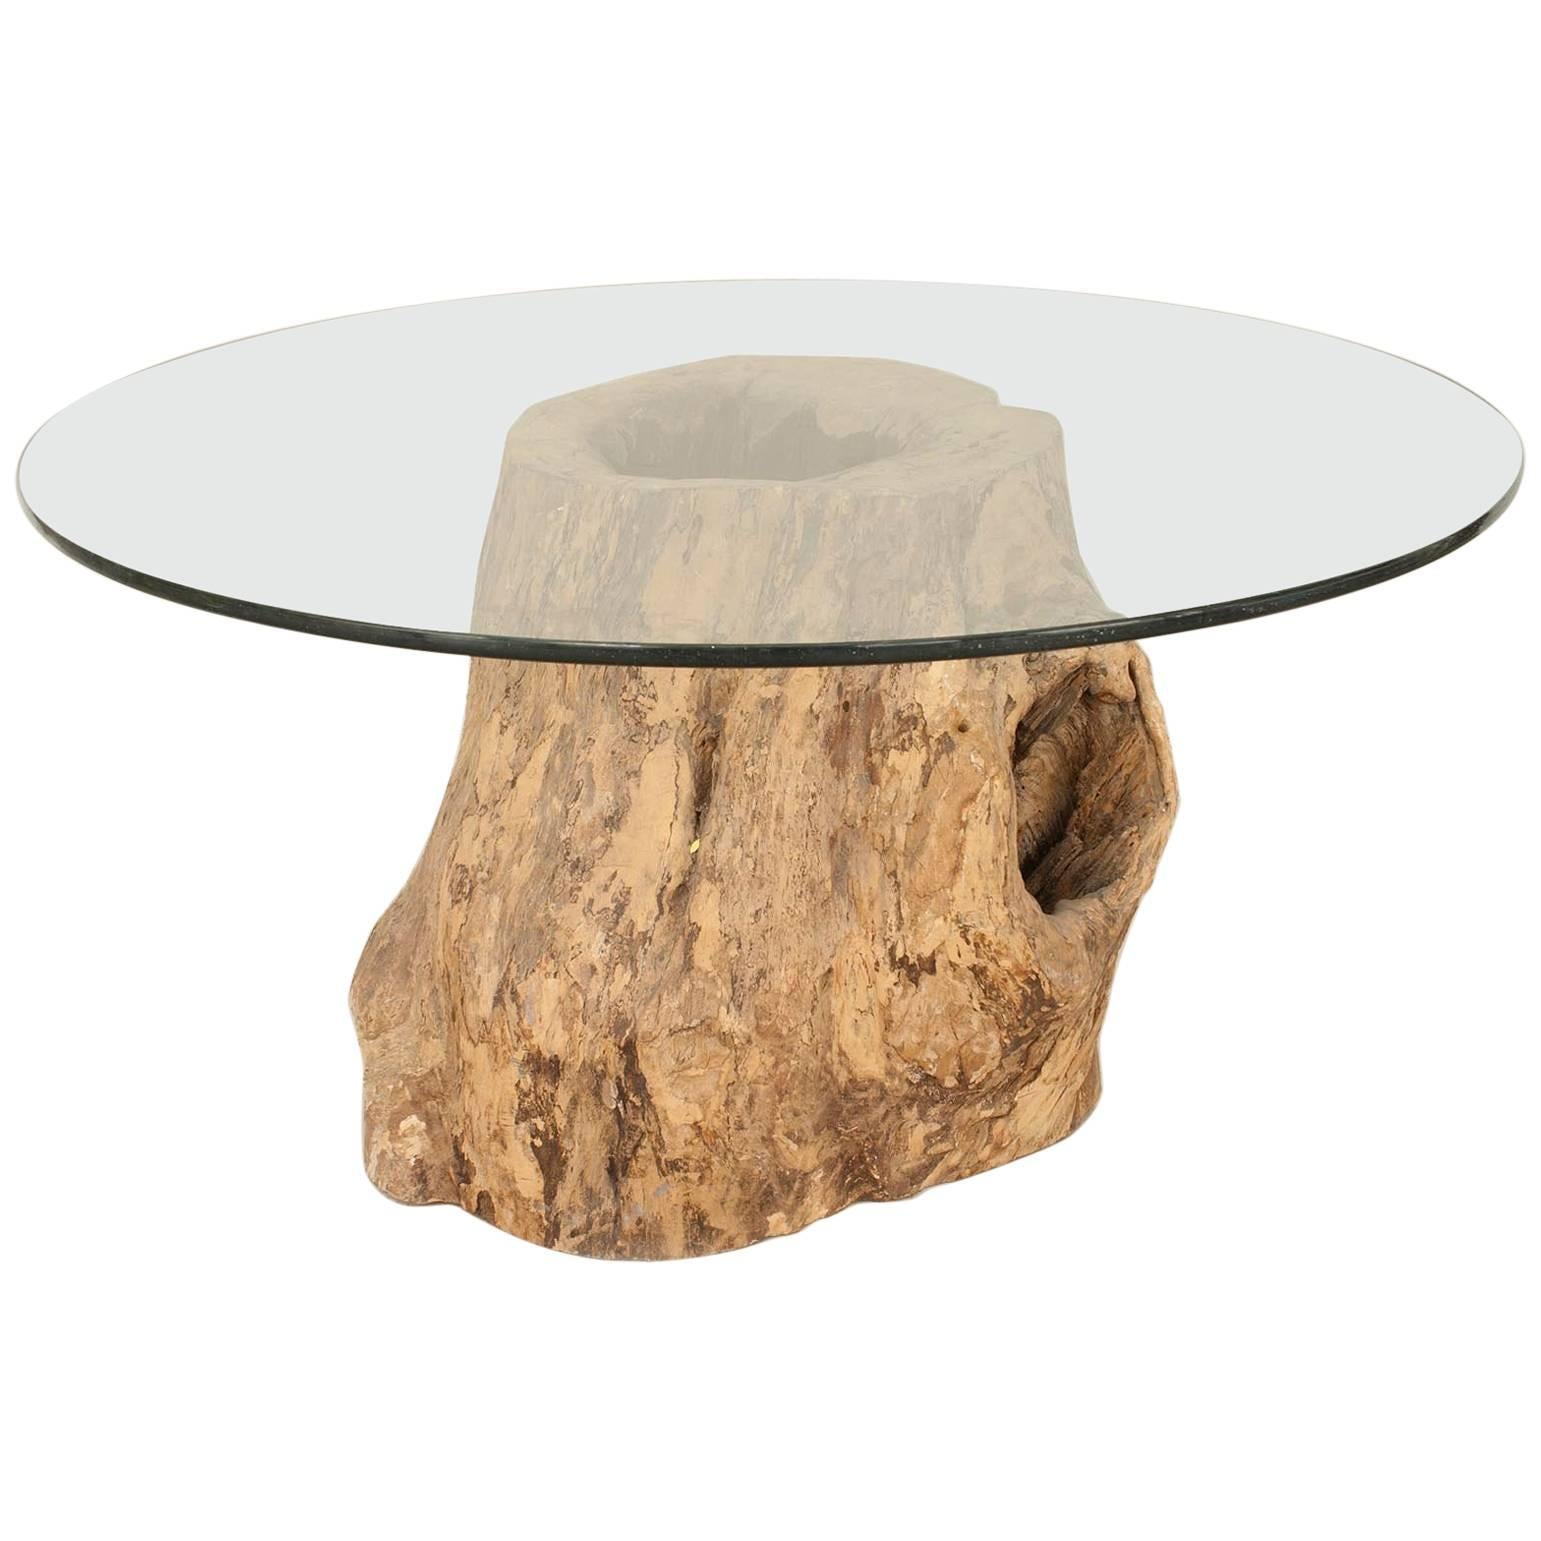 Rustic Adirondack Style Tree Trunk Dining Table